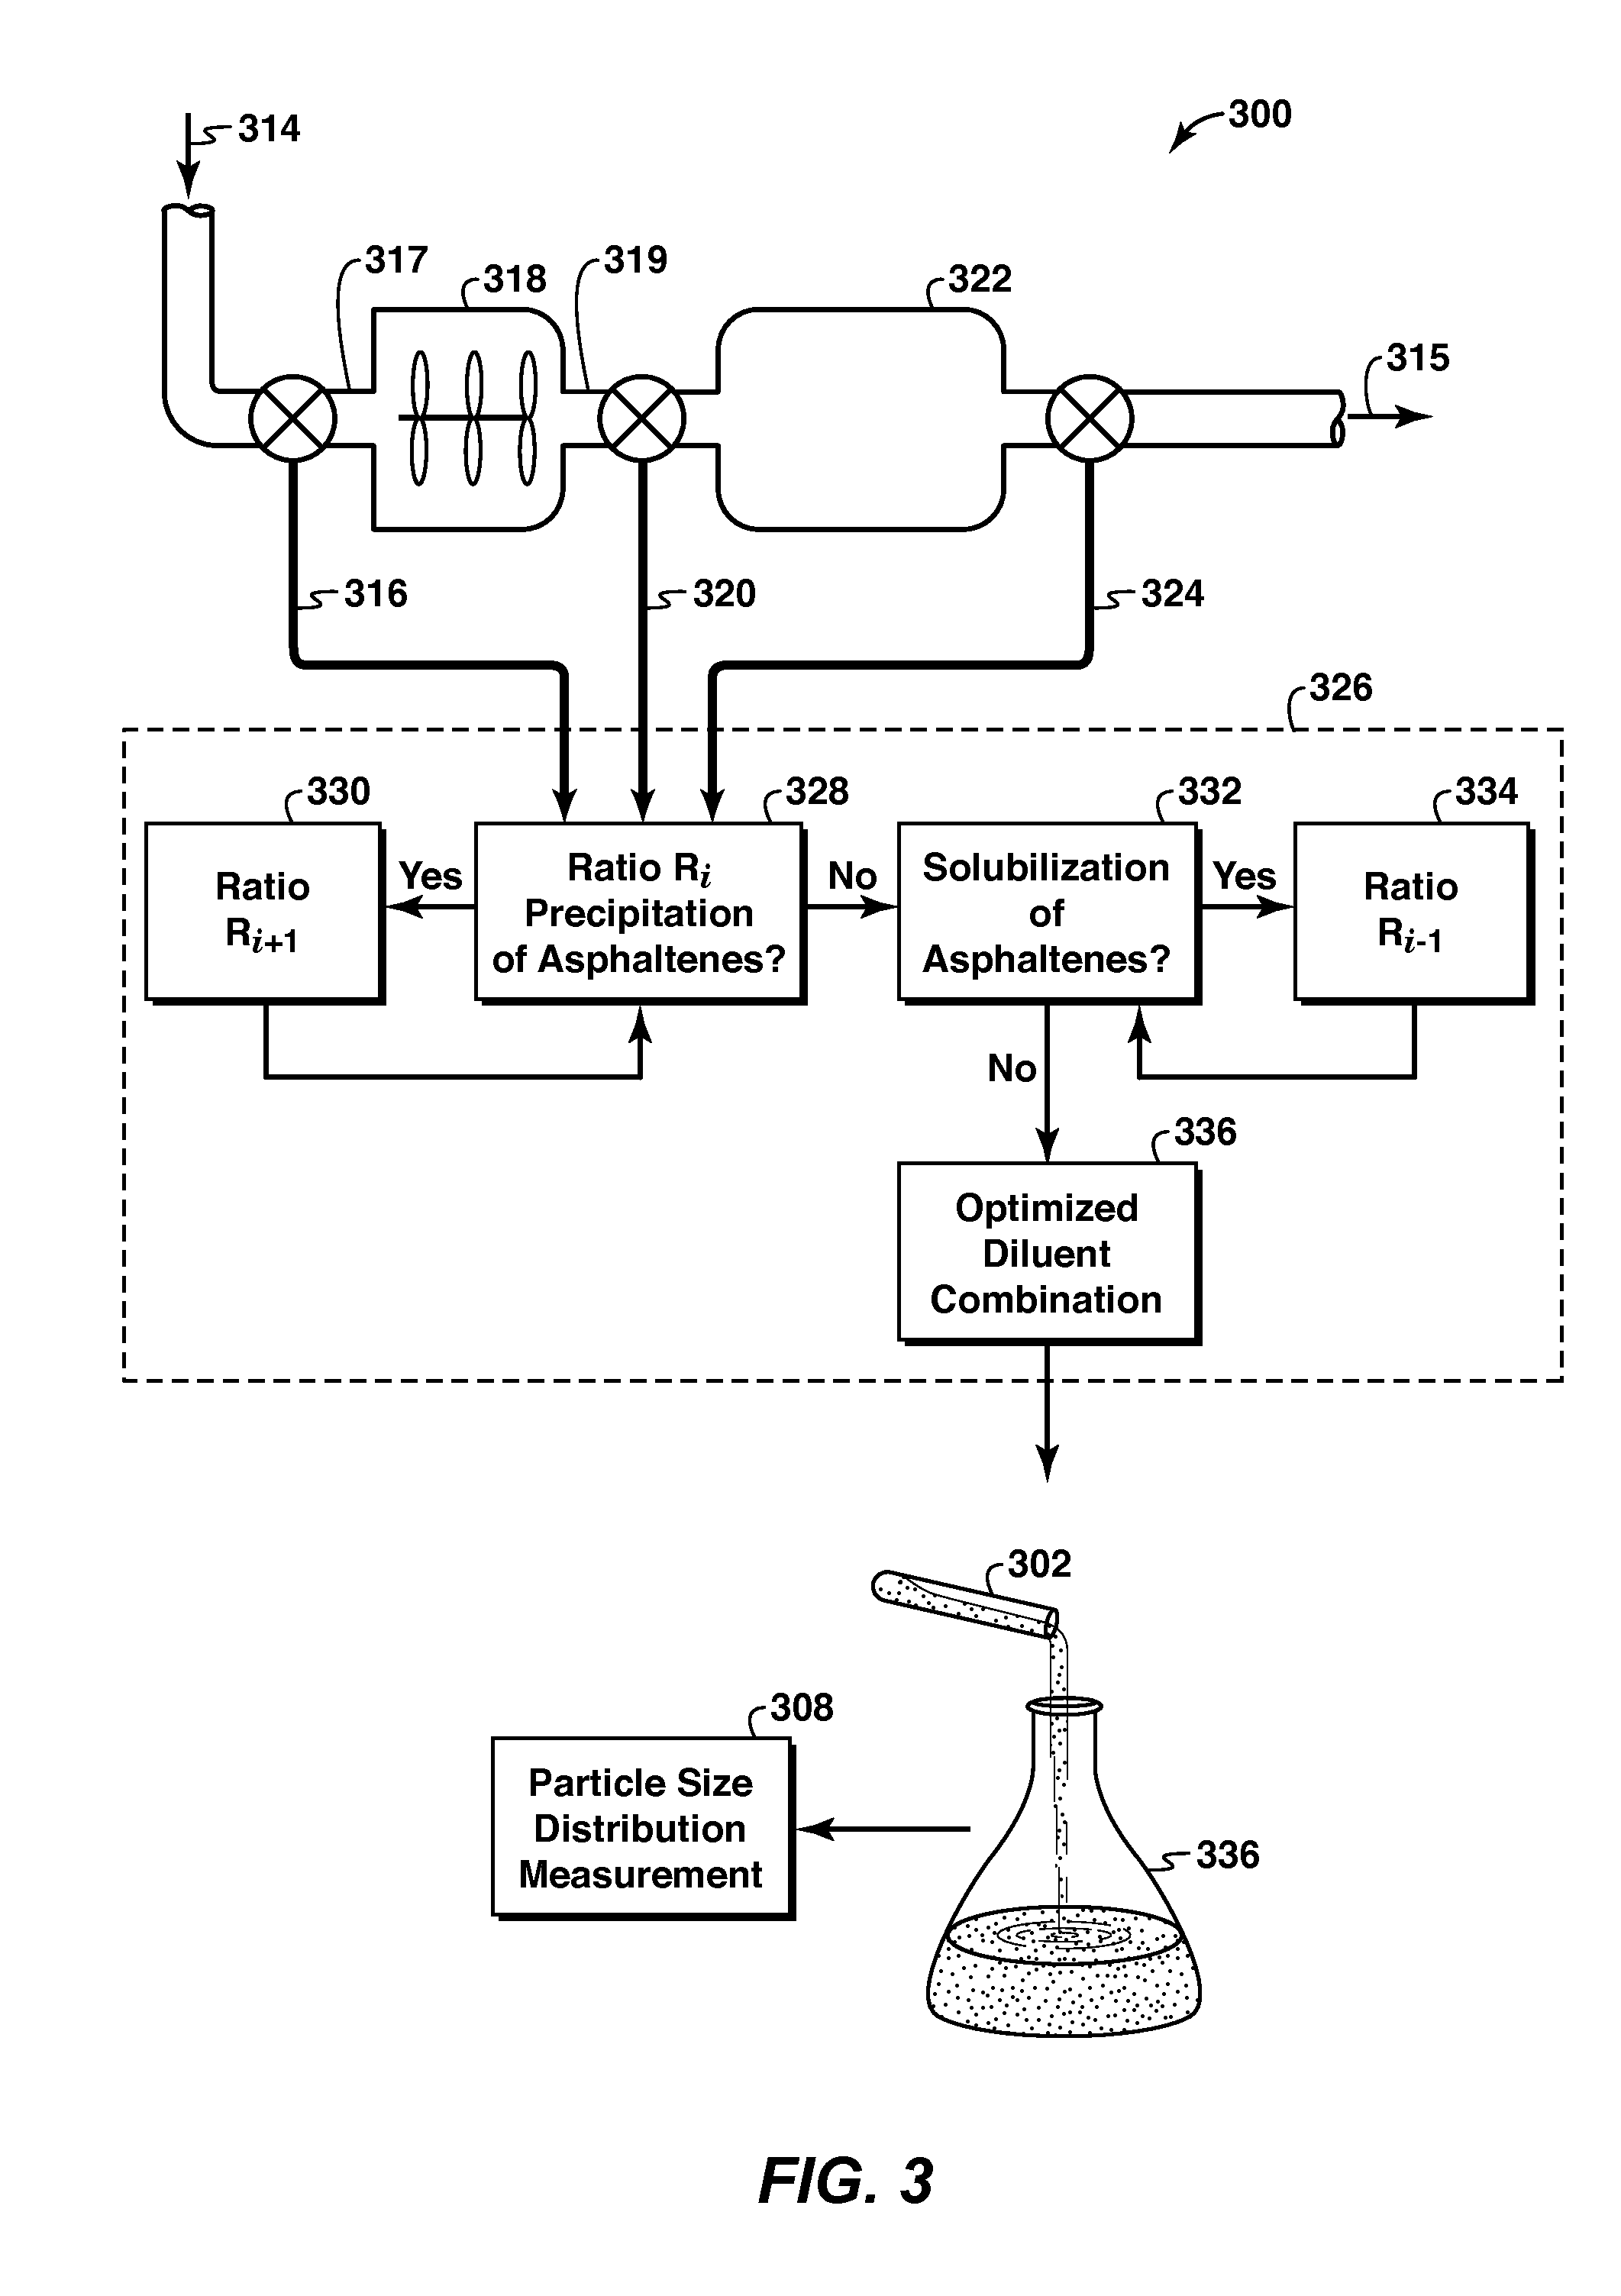 Method and System For Determining Particle Size Distribution and Filterable Solids In A Bitumen-Containing Fluid